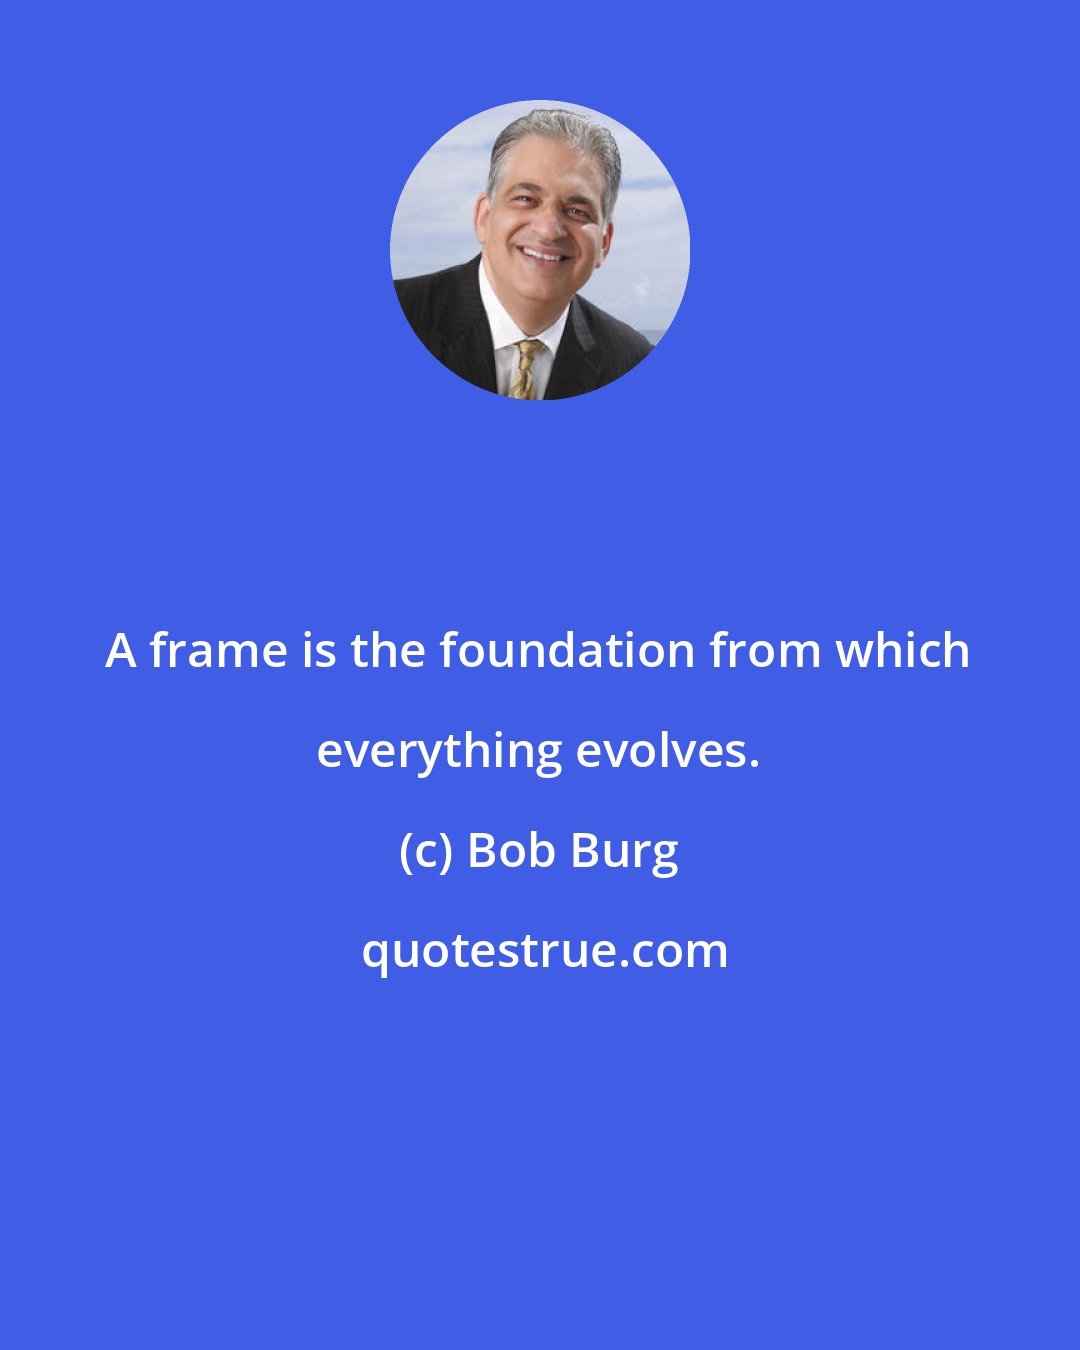 Bob Burg: A frame is the foundation from which everything evolves.